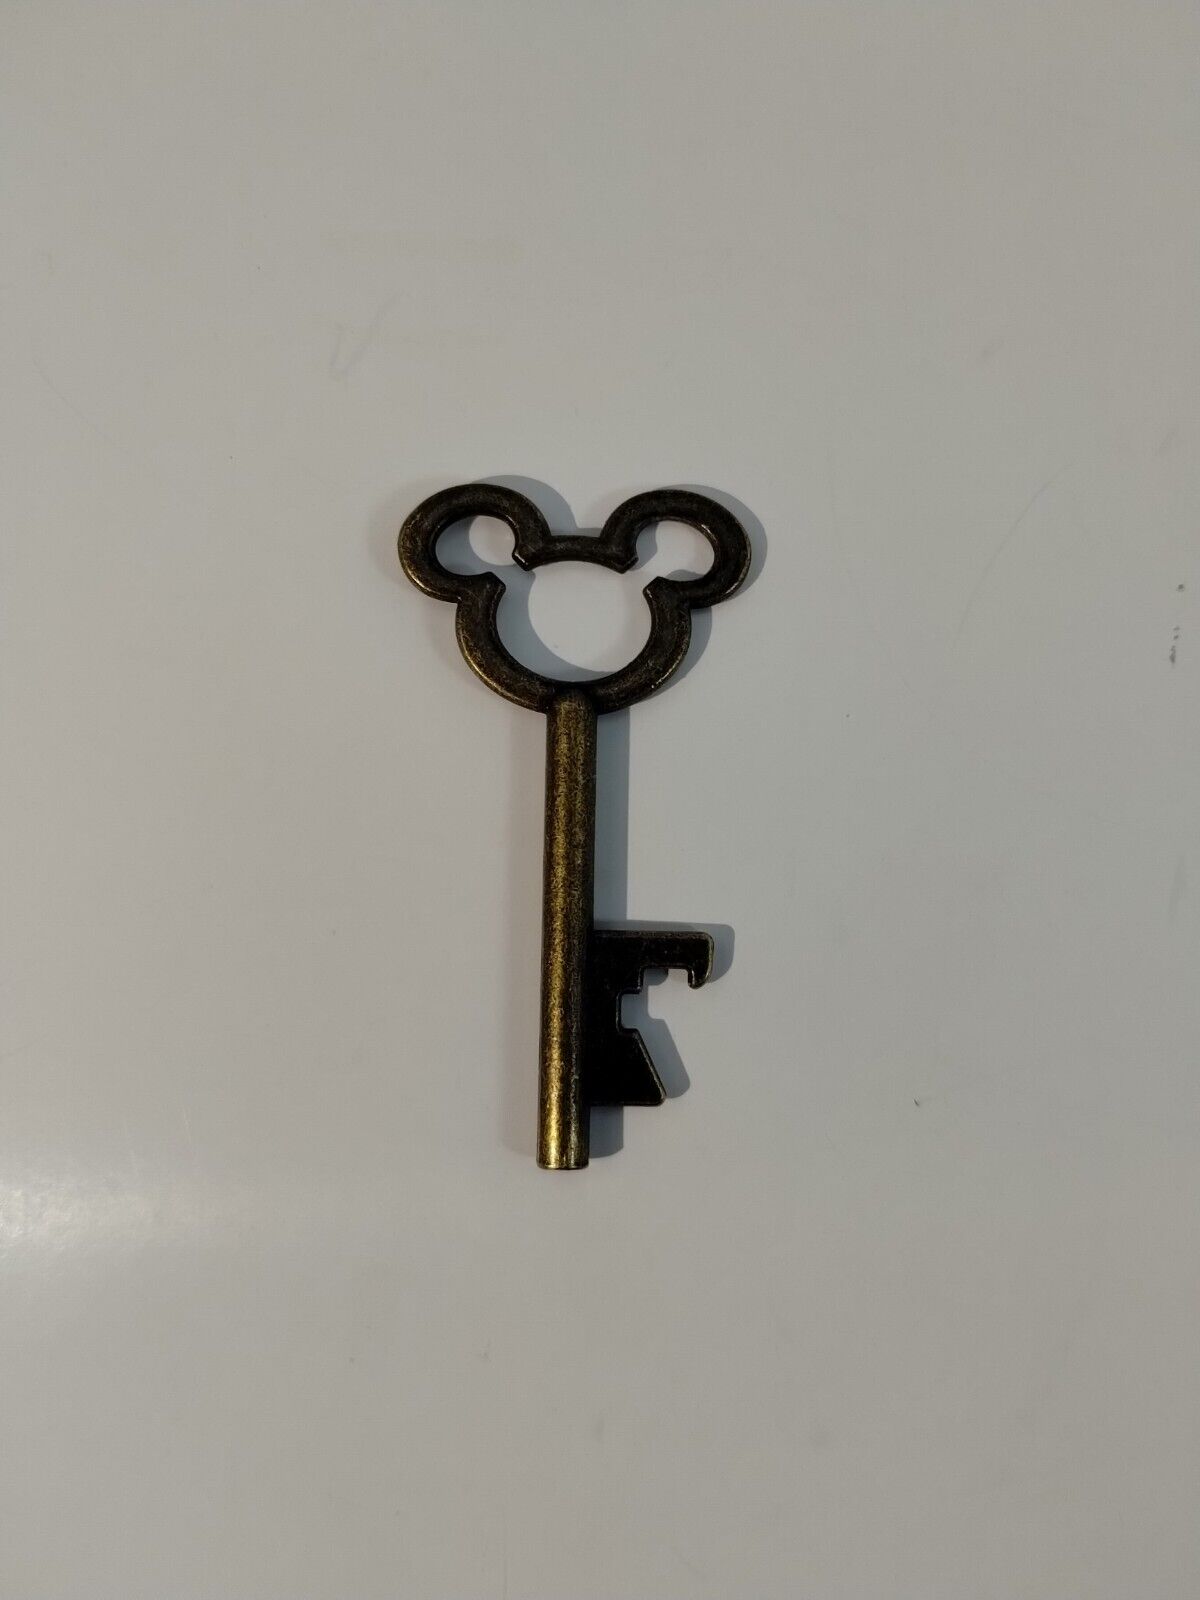 Mickey Mouse Shaped Bottle Opener Polished Brass Toned Skeleton Key Chain VG+ LN